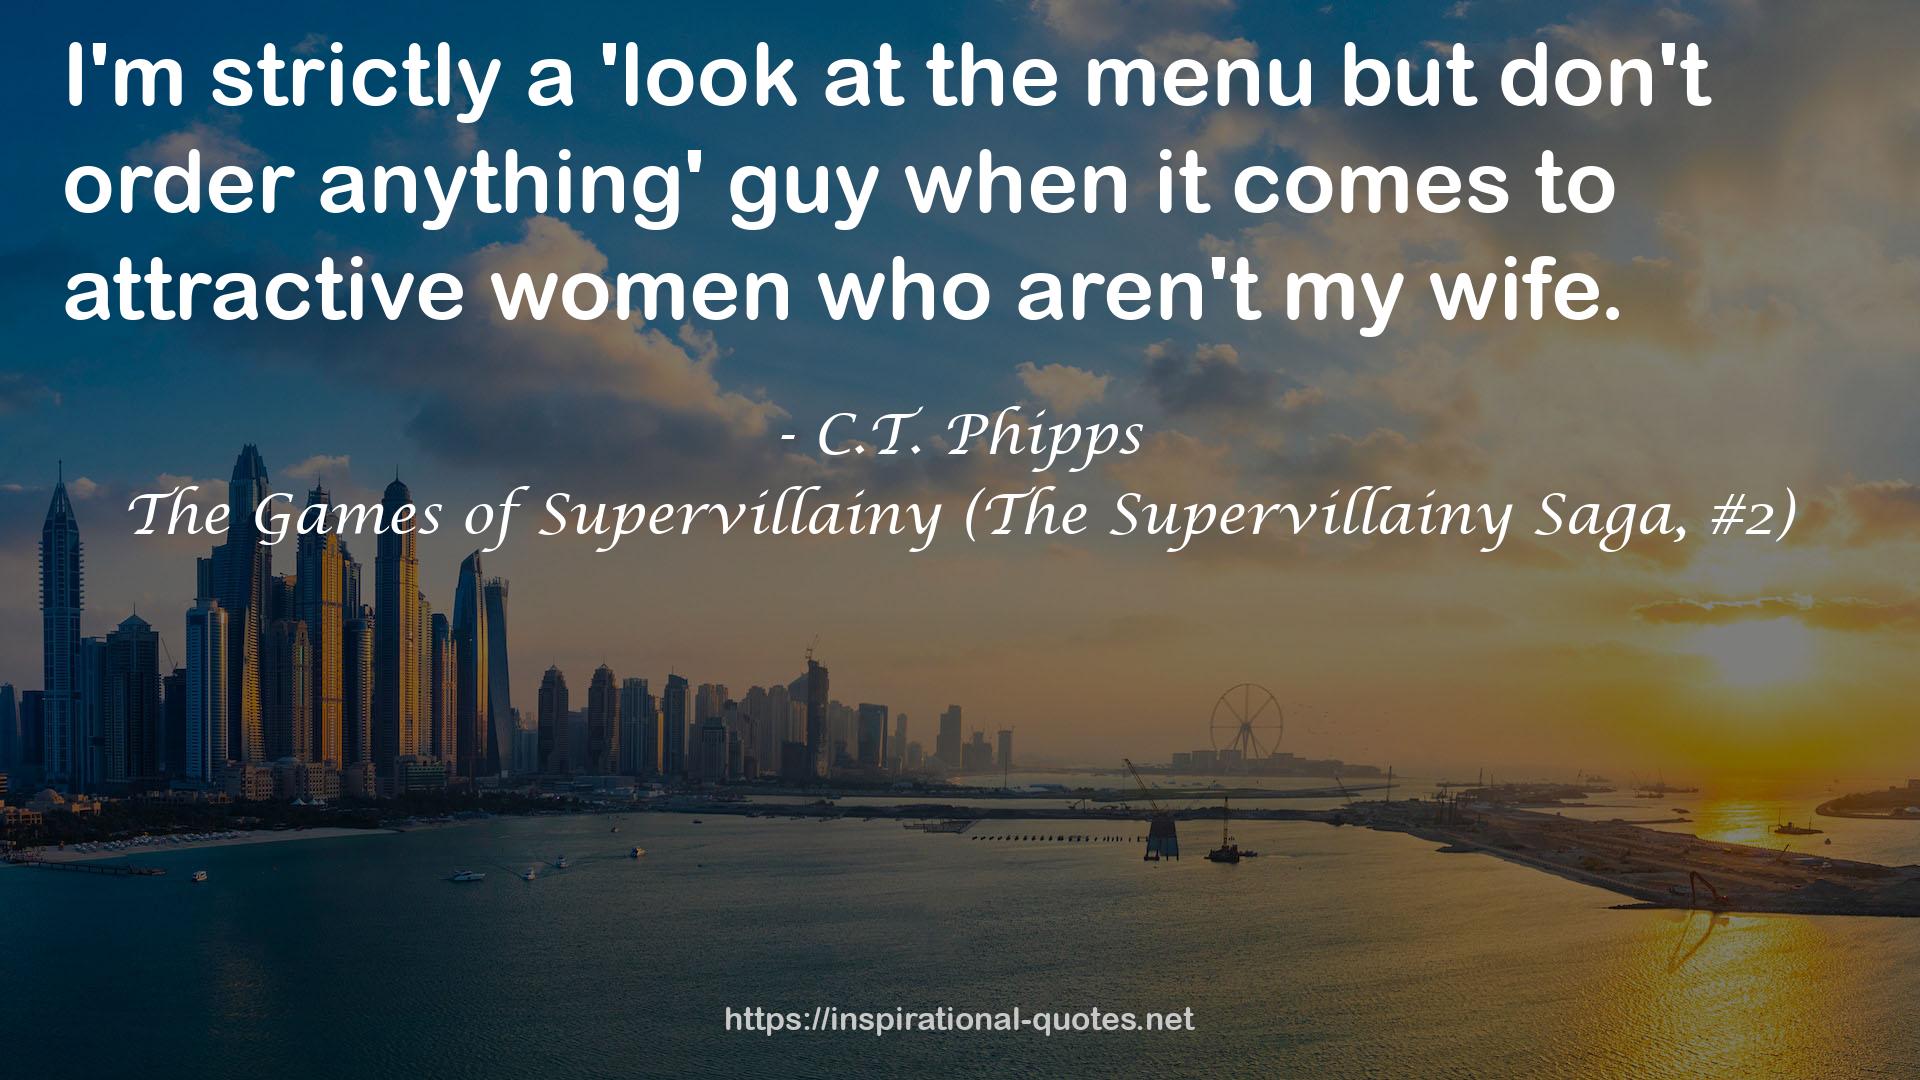 The Games of Supervillainy (The Supervillainy Saga, #2) QUOTES